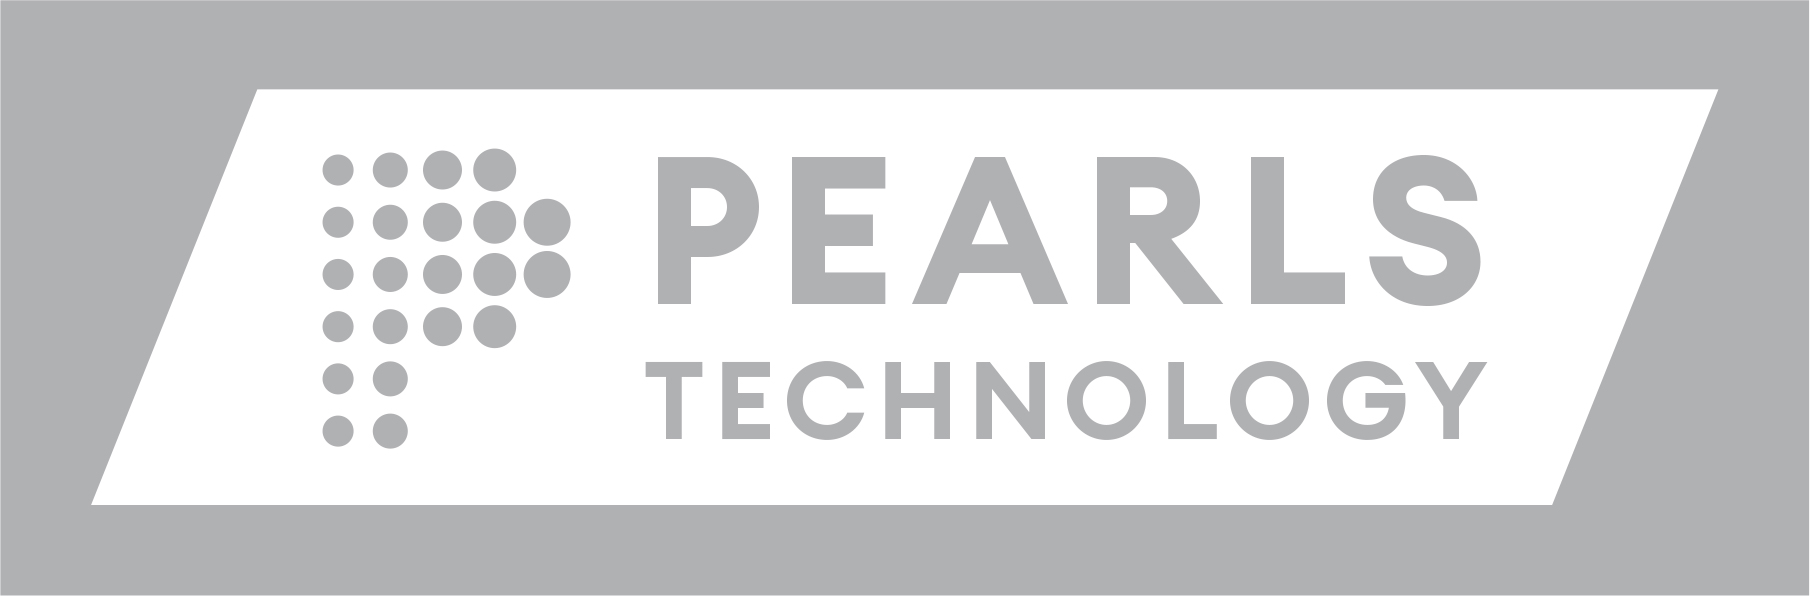 PEARLS TECHNOLOGY